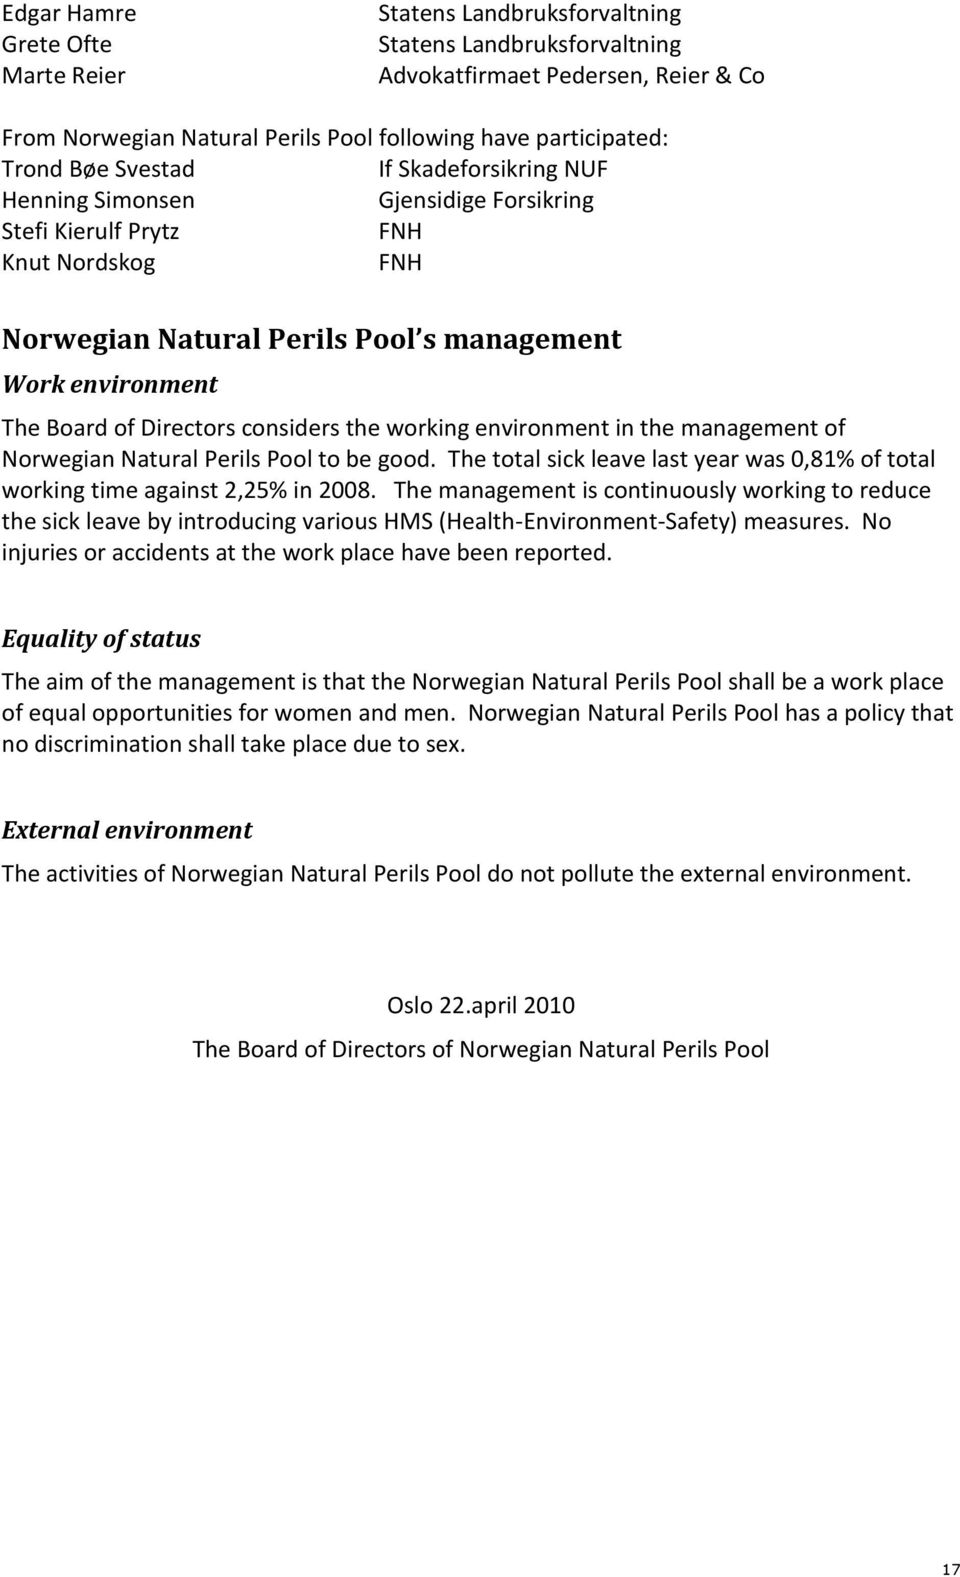 management of Norwegian Natural Perils Pool to be good. The total sick leave last year was 0,81% of total working time against 2,25% in 2008.